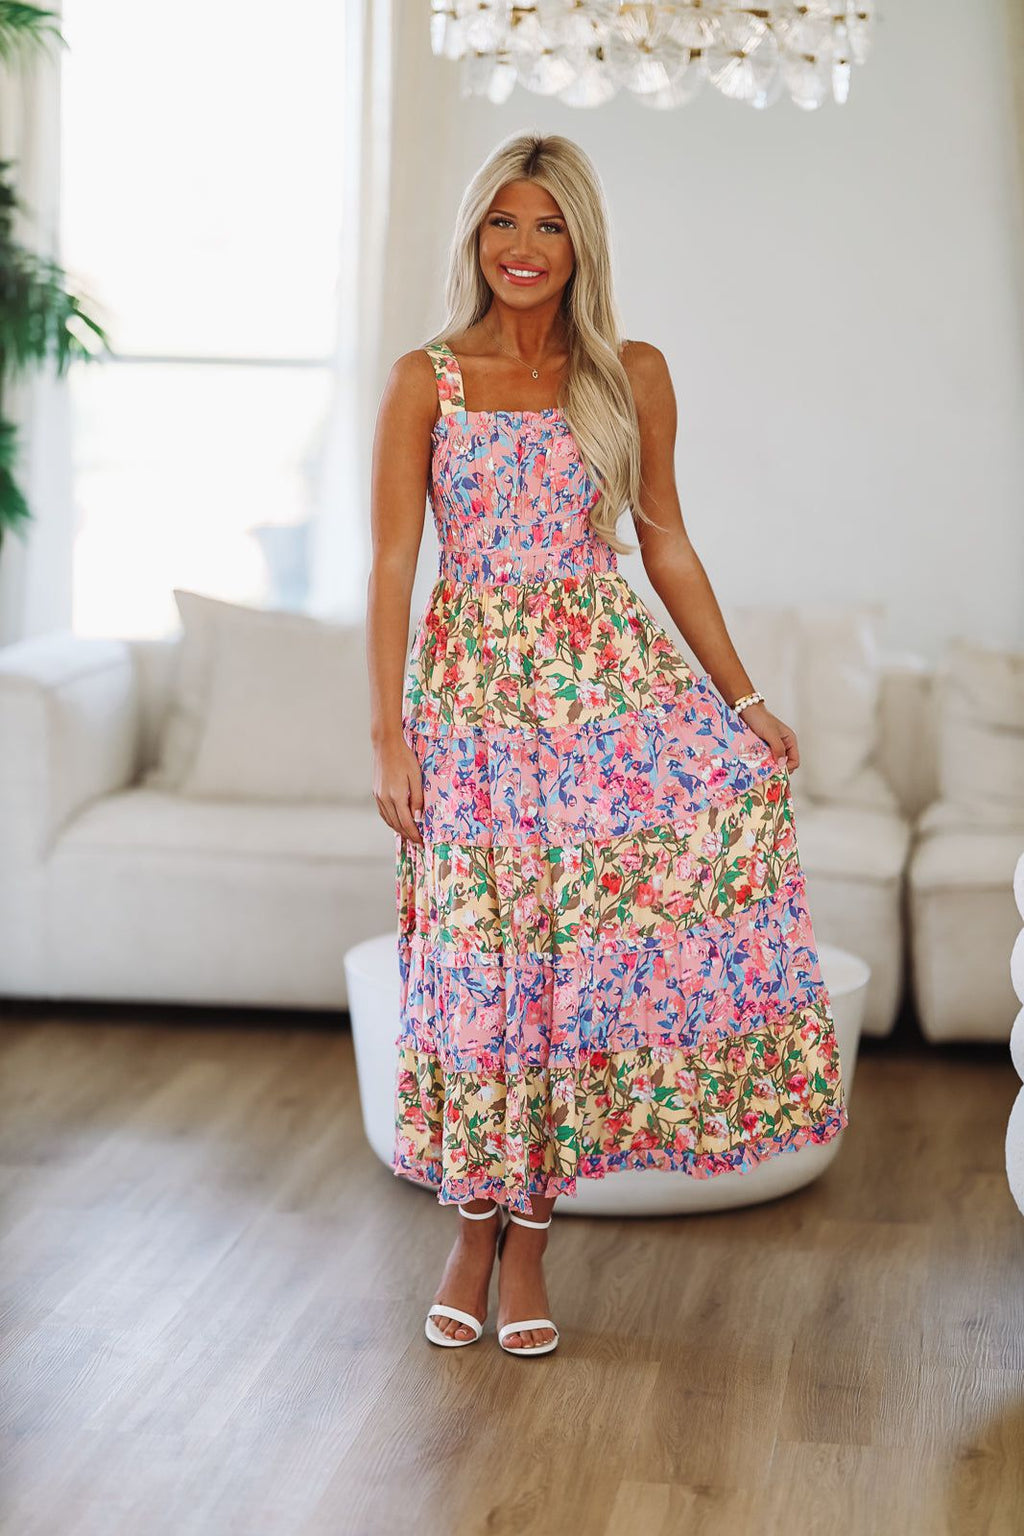 HAZEL & OLIVE Spring Into Summer Maxi Dress - Pink and Yellow